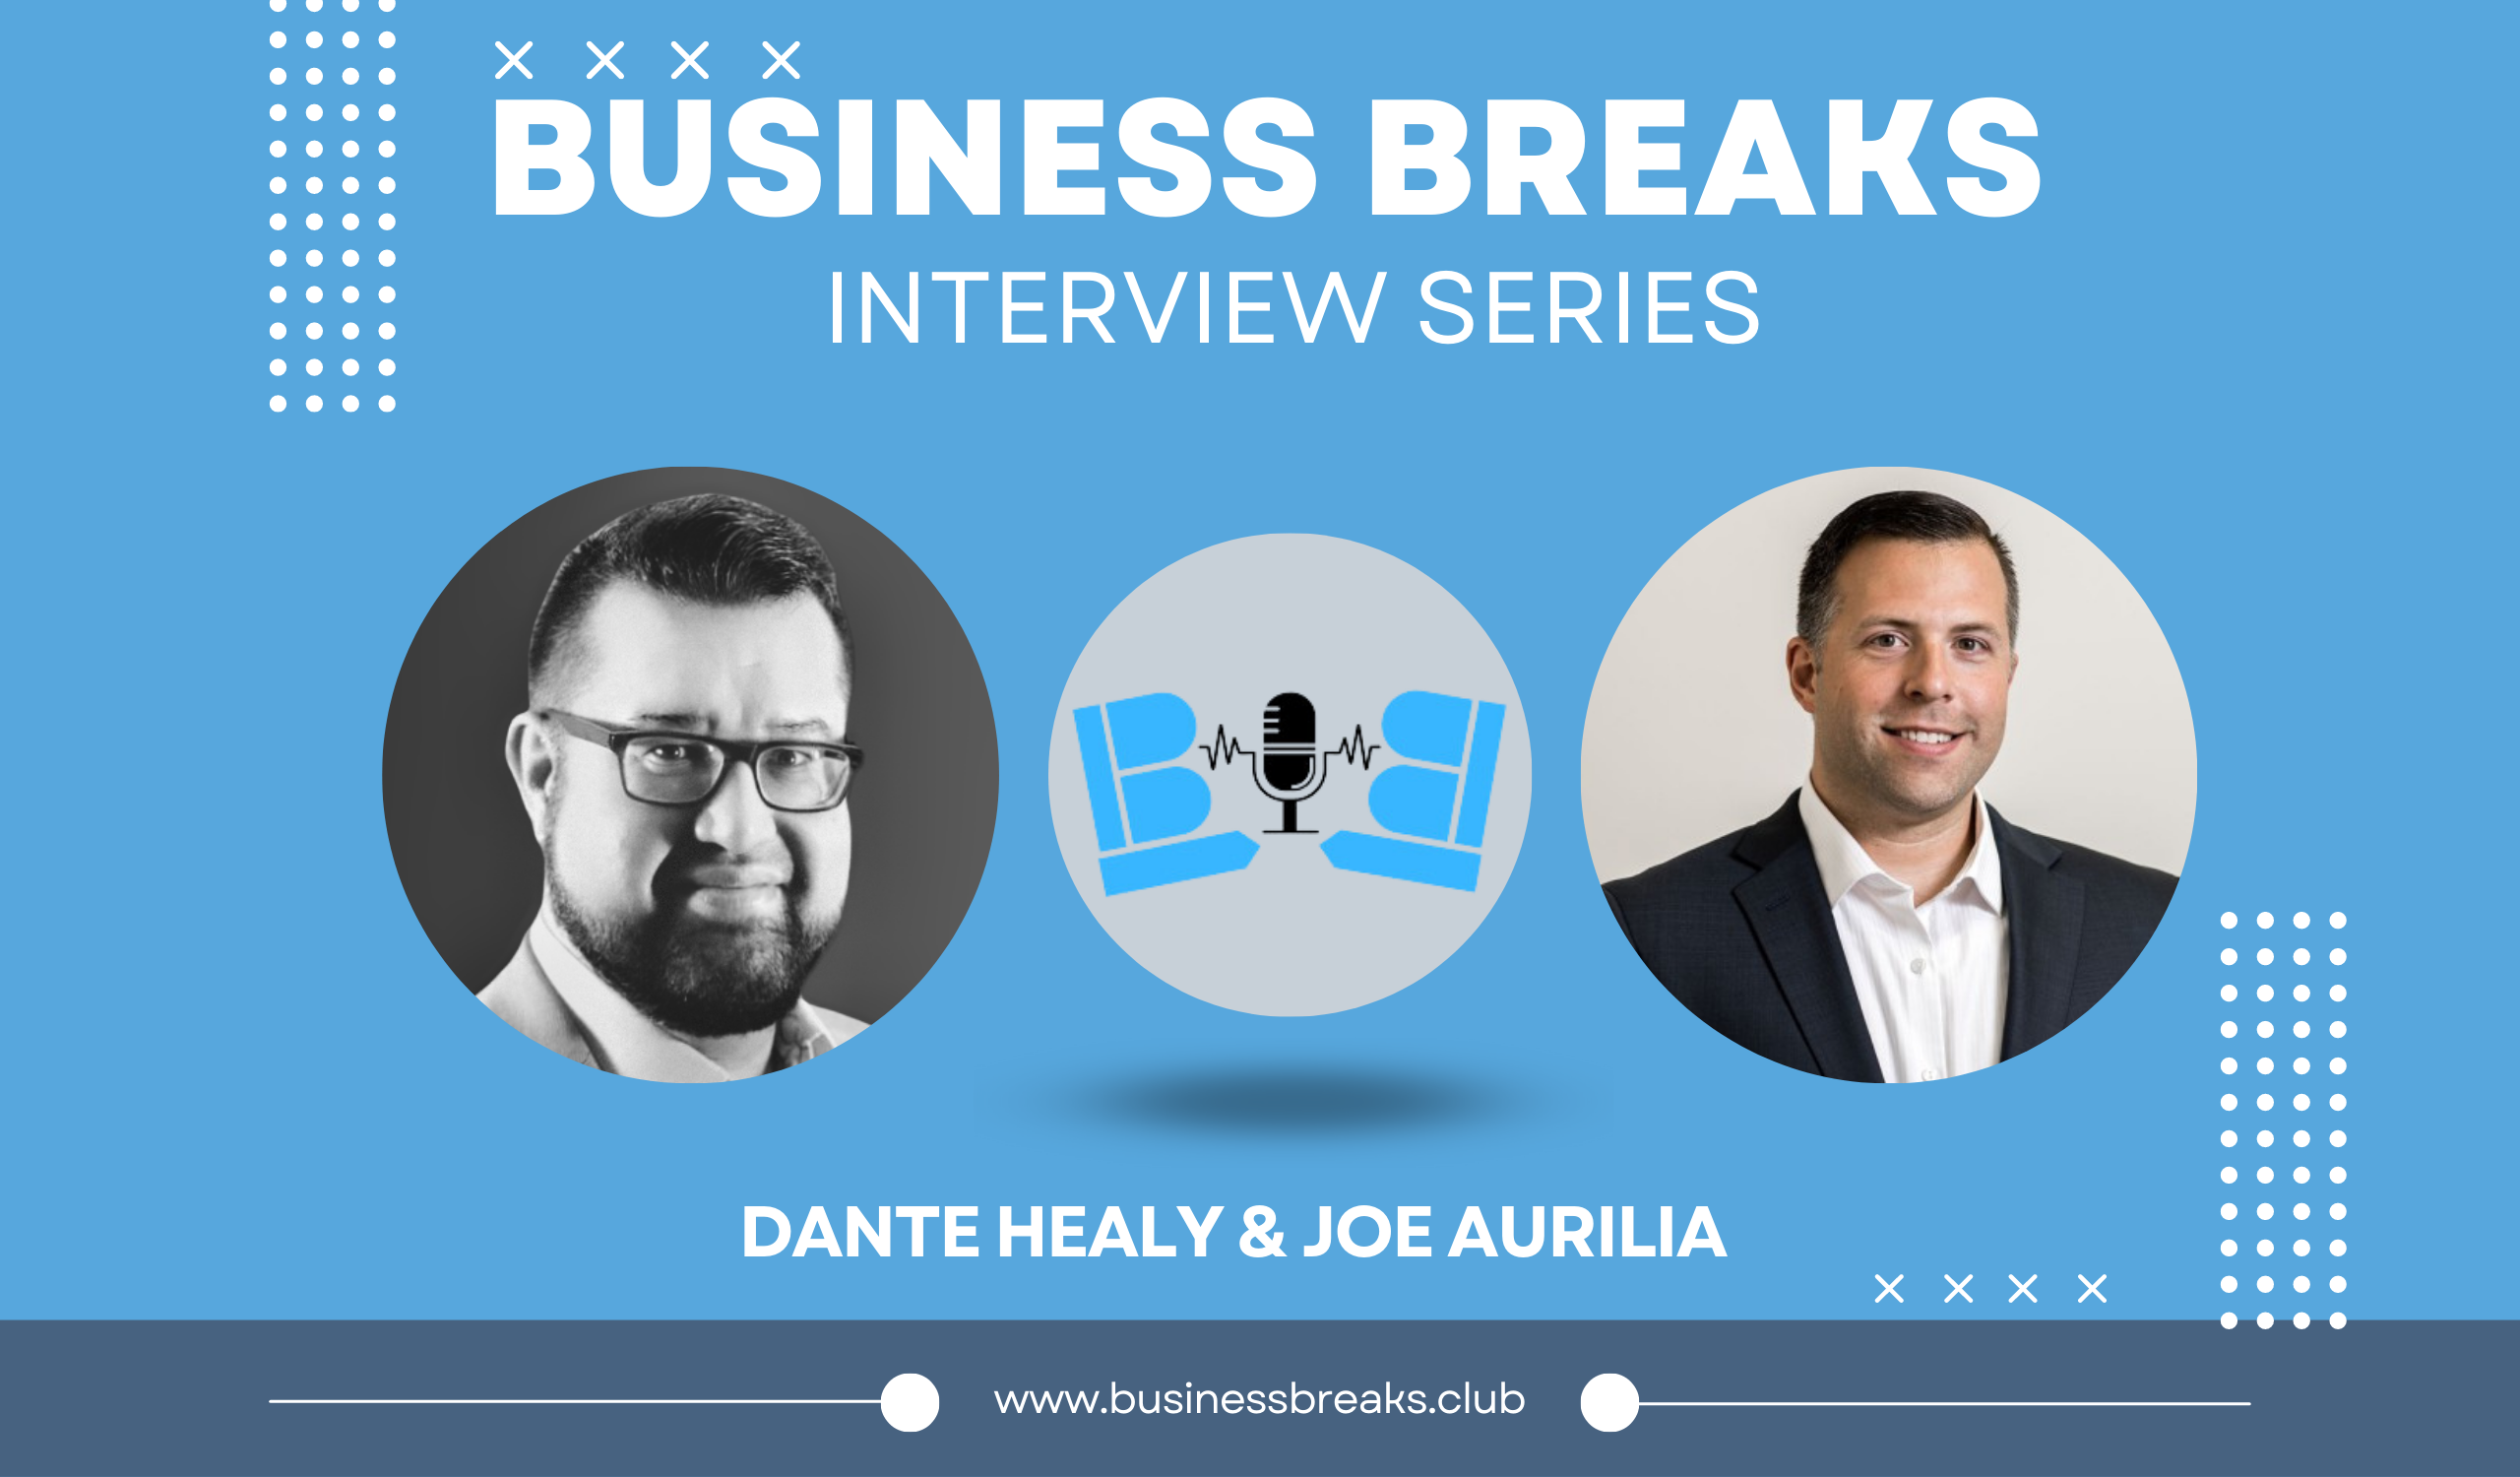 Podcast, Business Breaks, Leadership, Recruitment, Remote working, Distributed teams, Business, Growth, Startup, Technology, People, Management, Team Performance, Diverse careers